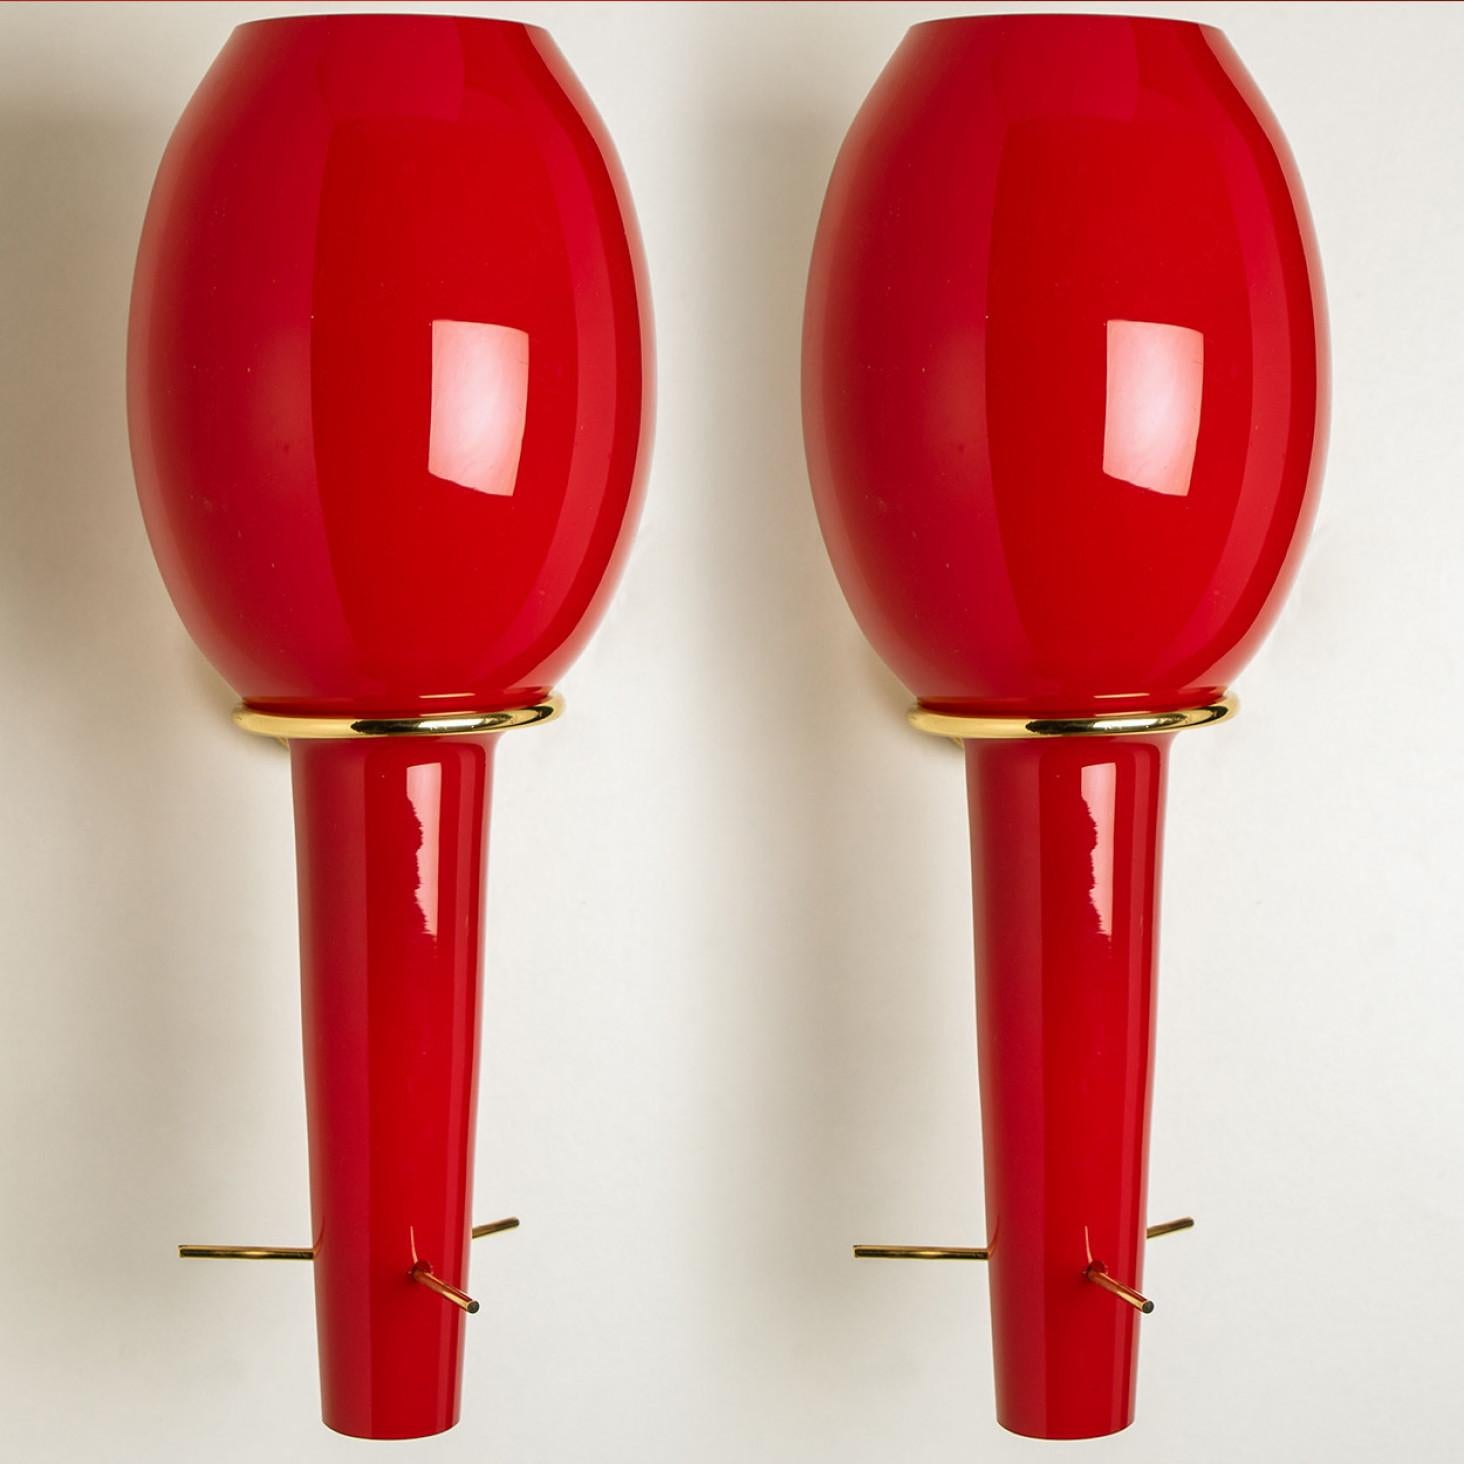 Playful bright red wall lights, made by Stilnovo in Italy, Europe, around 1960. The wall lights are made of a brass frame holding the red glass. When the lights are on, they give a warm, red light. As shown in the pictures.

Dimensions:
Height: